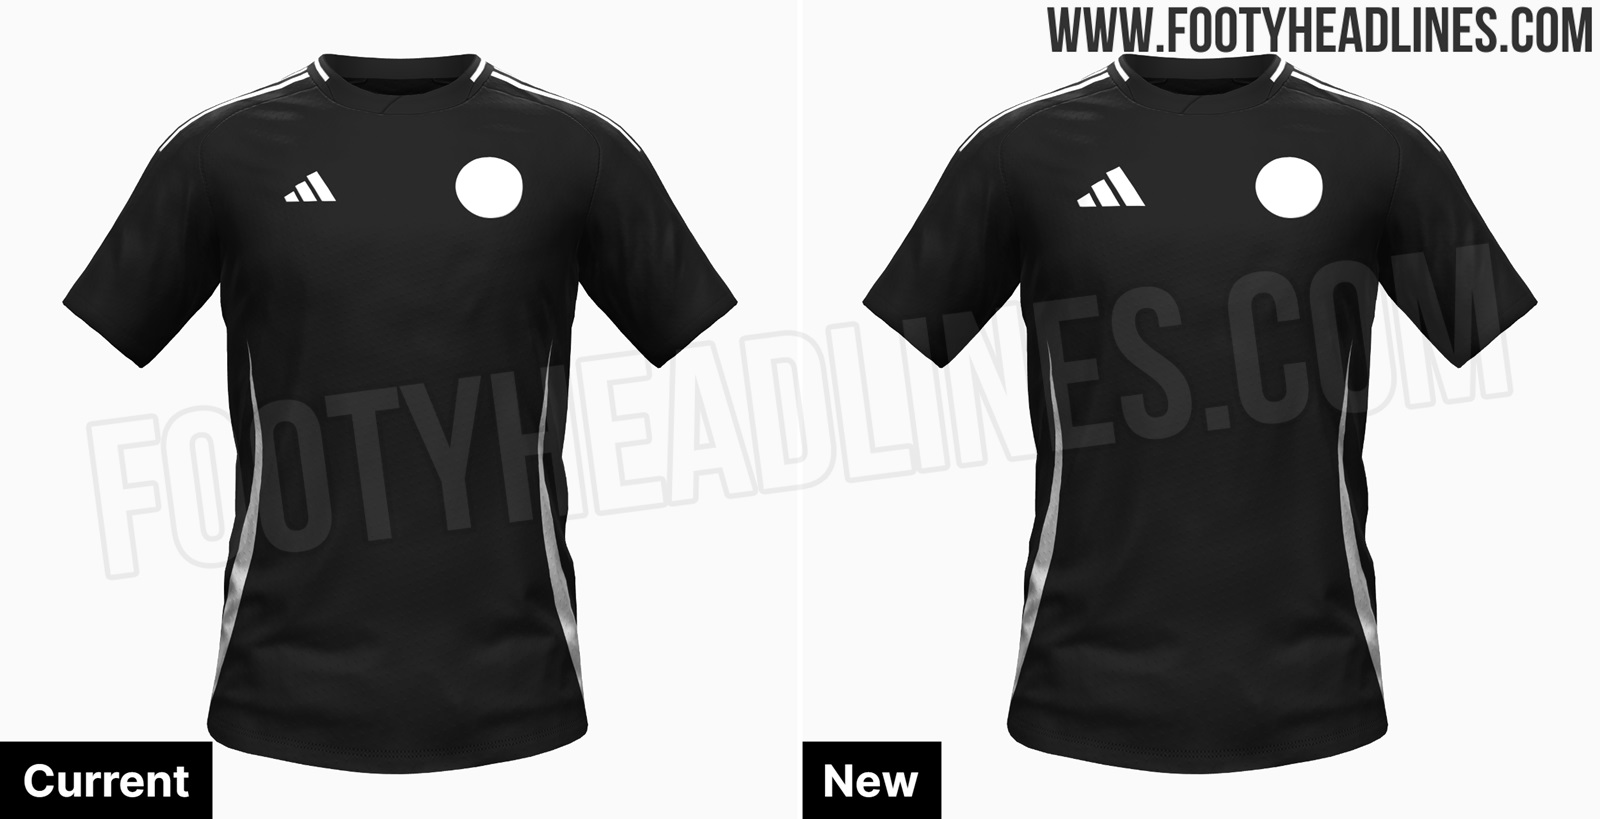 Exclusive: Adidas to Introduce Significantly Enlarged Logo on Football Kits  - Footy Headlines | Sport-T-Shirts